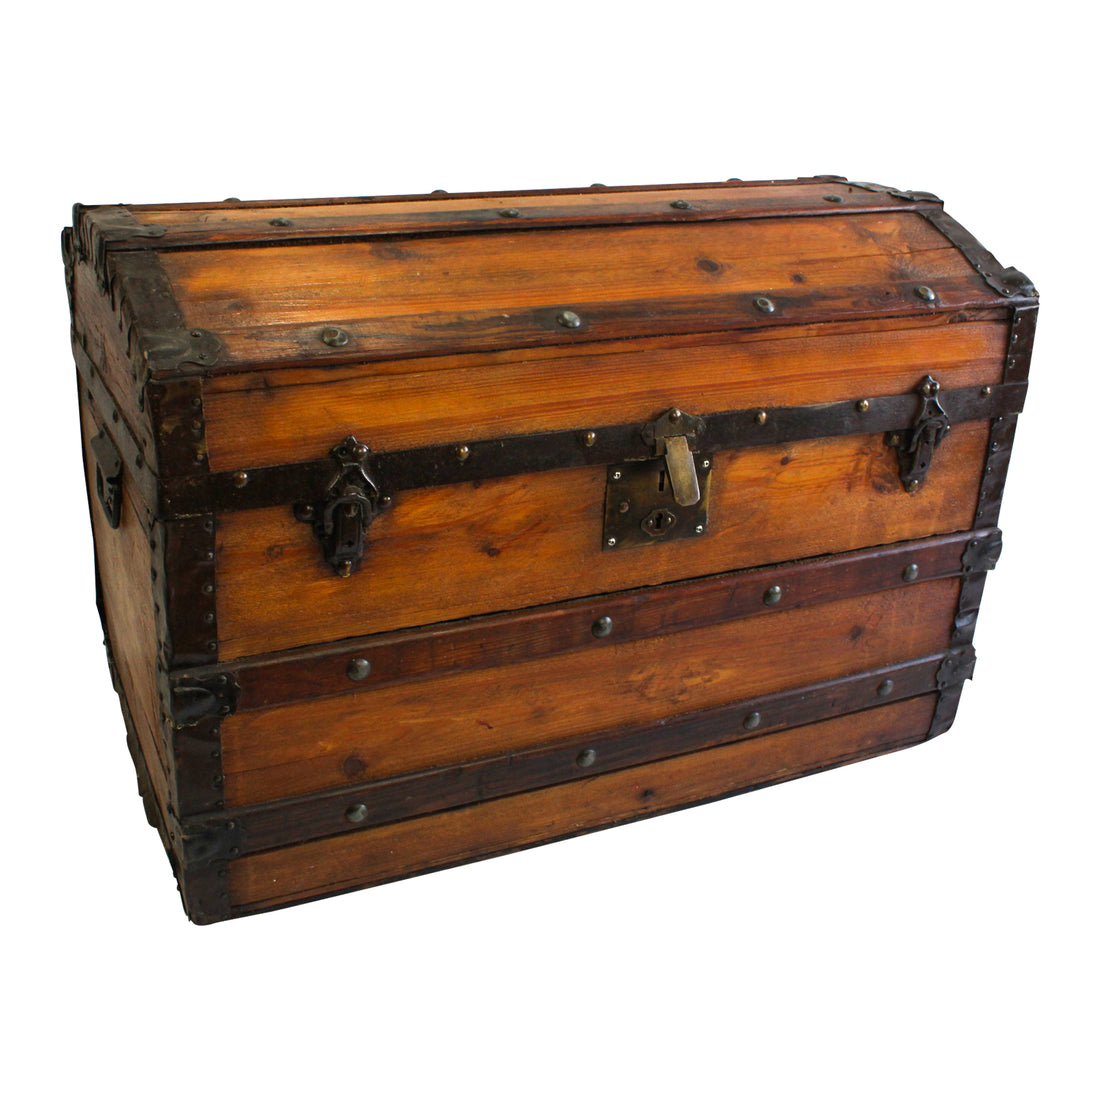 Wooden Dome Top Trunk